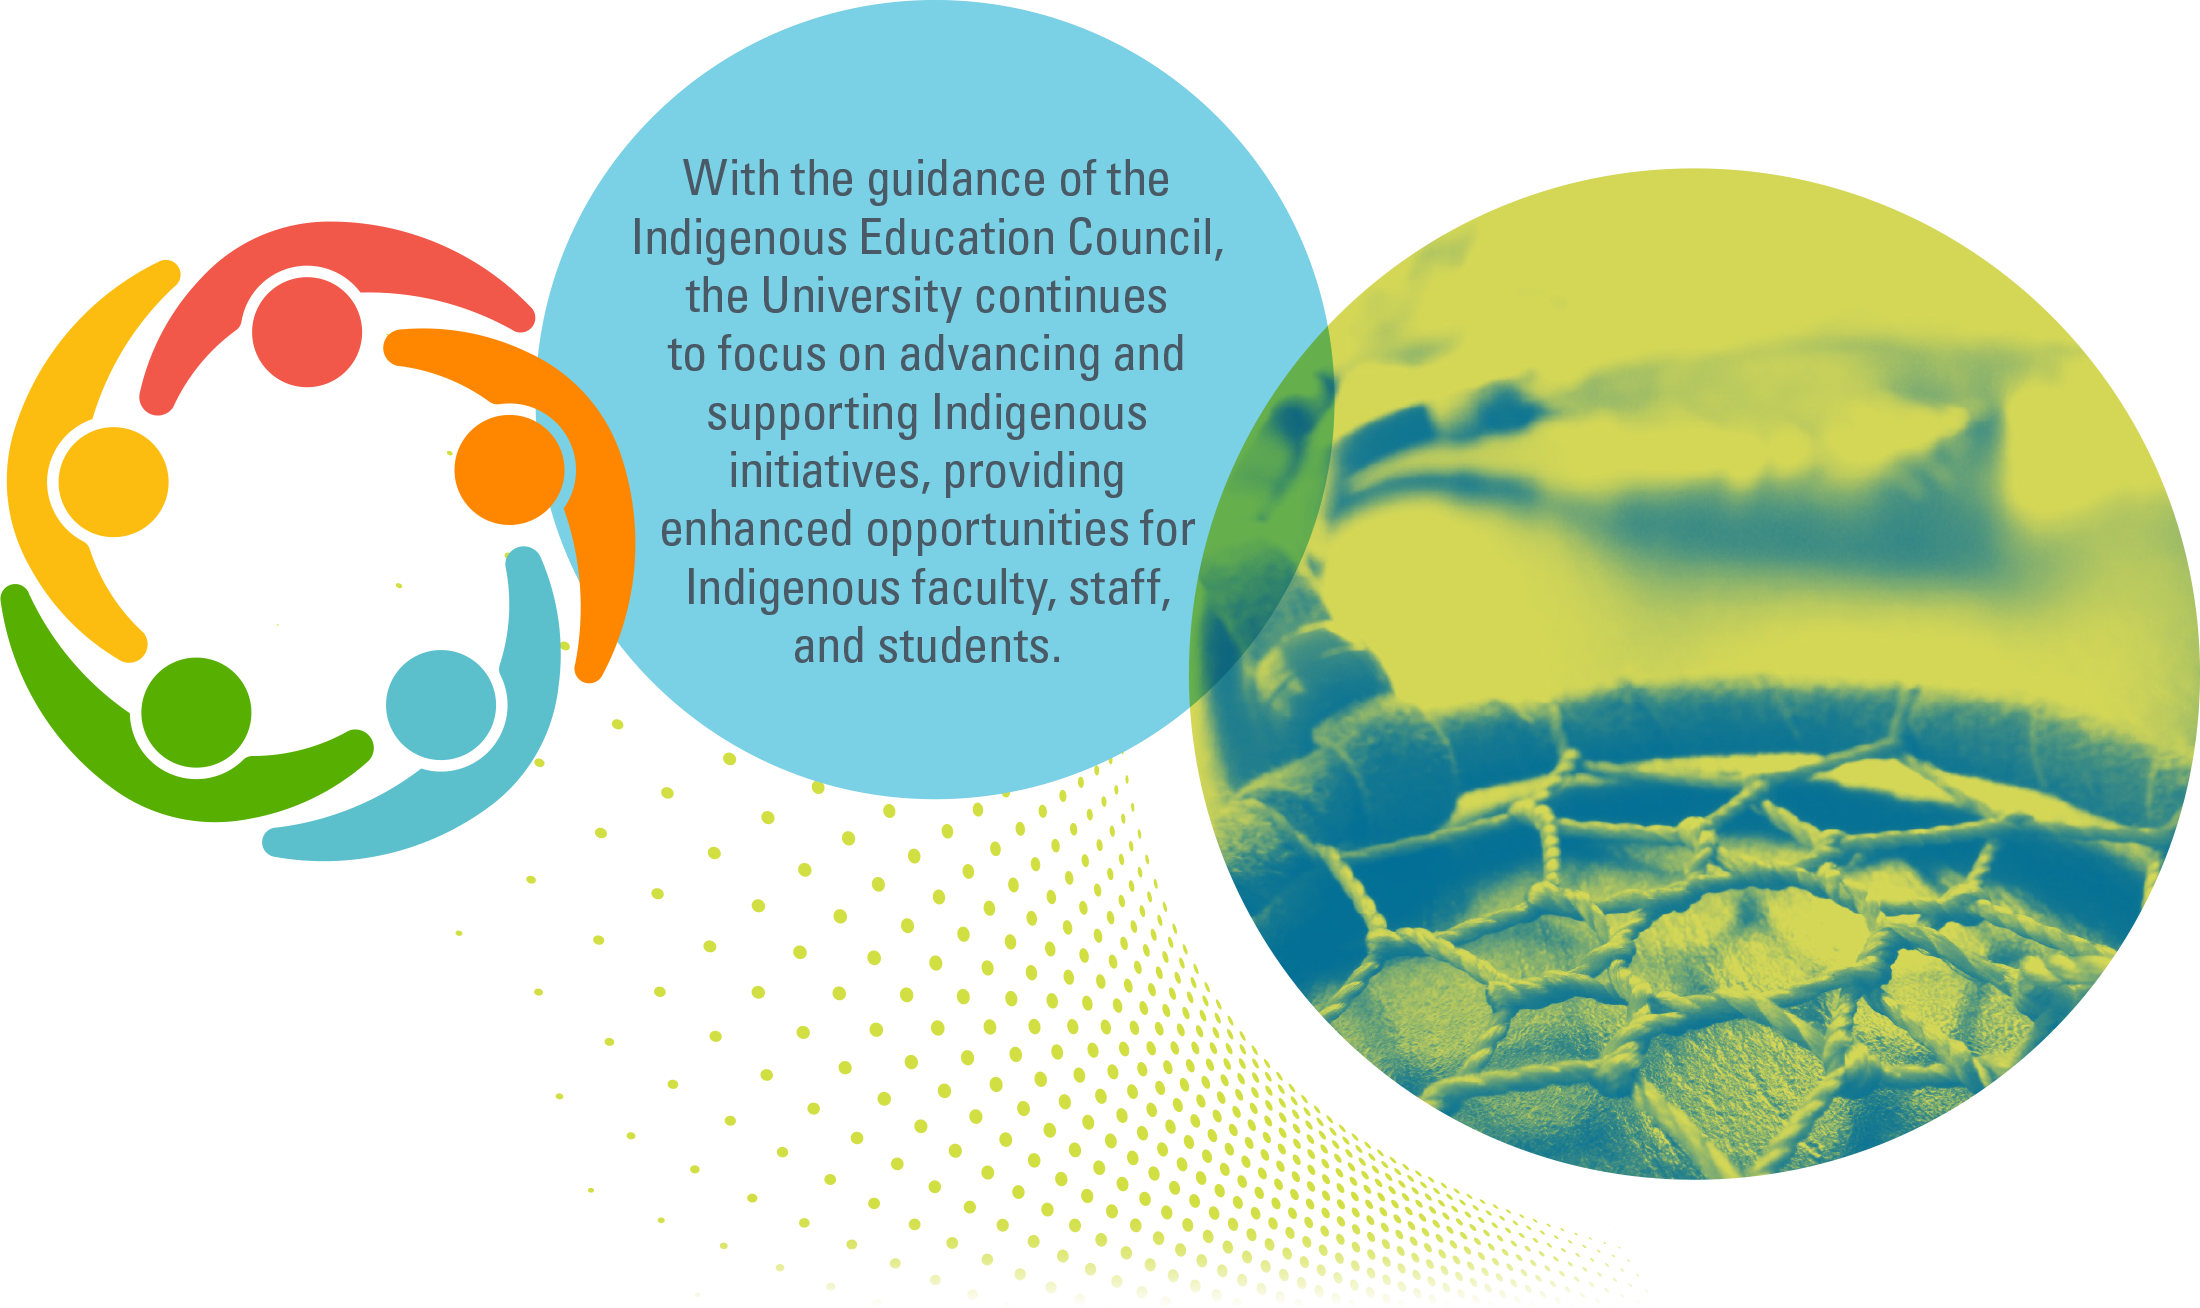 With the guidance of the Indigenous Education Council, the University continues to focus on advancing and supporting Indigenous initiatives, providing enhanced opportunities for Indigenous faculty, staff, and students.